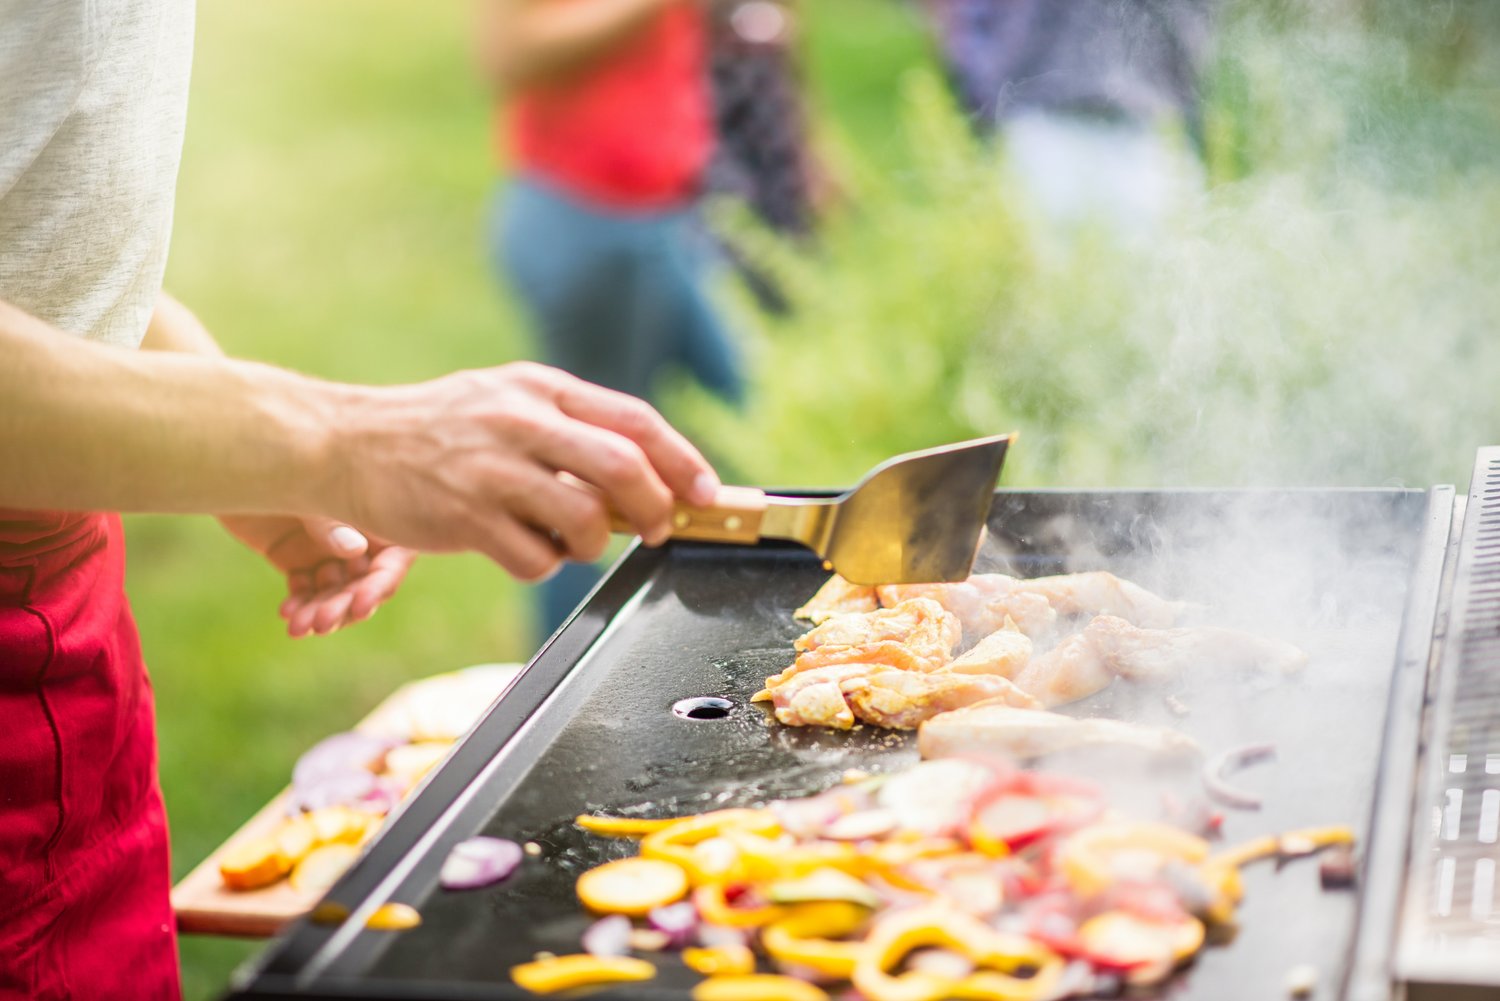 Camp Chef vs Blackstone: Evaluating Outdoor Cooking Equipment